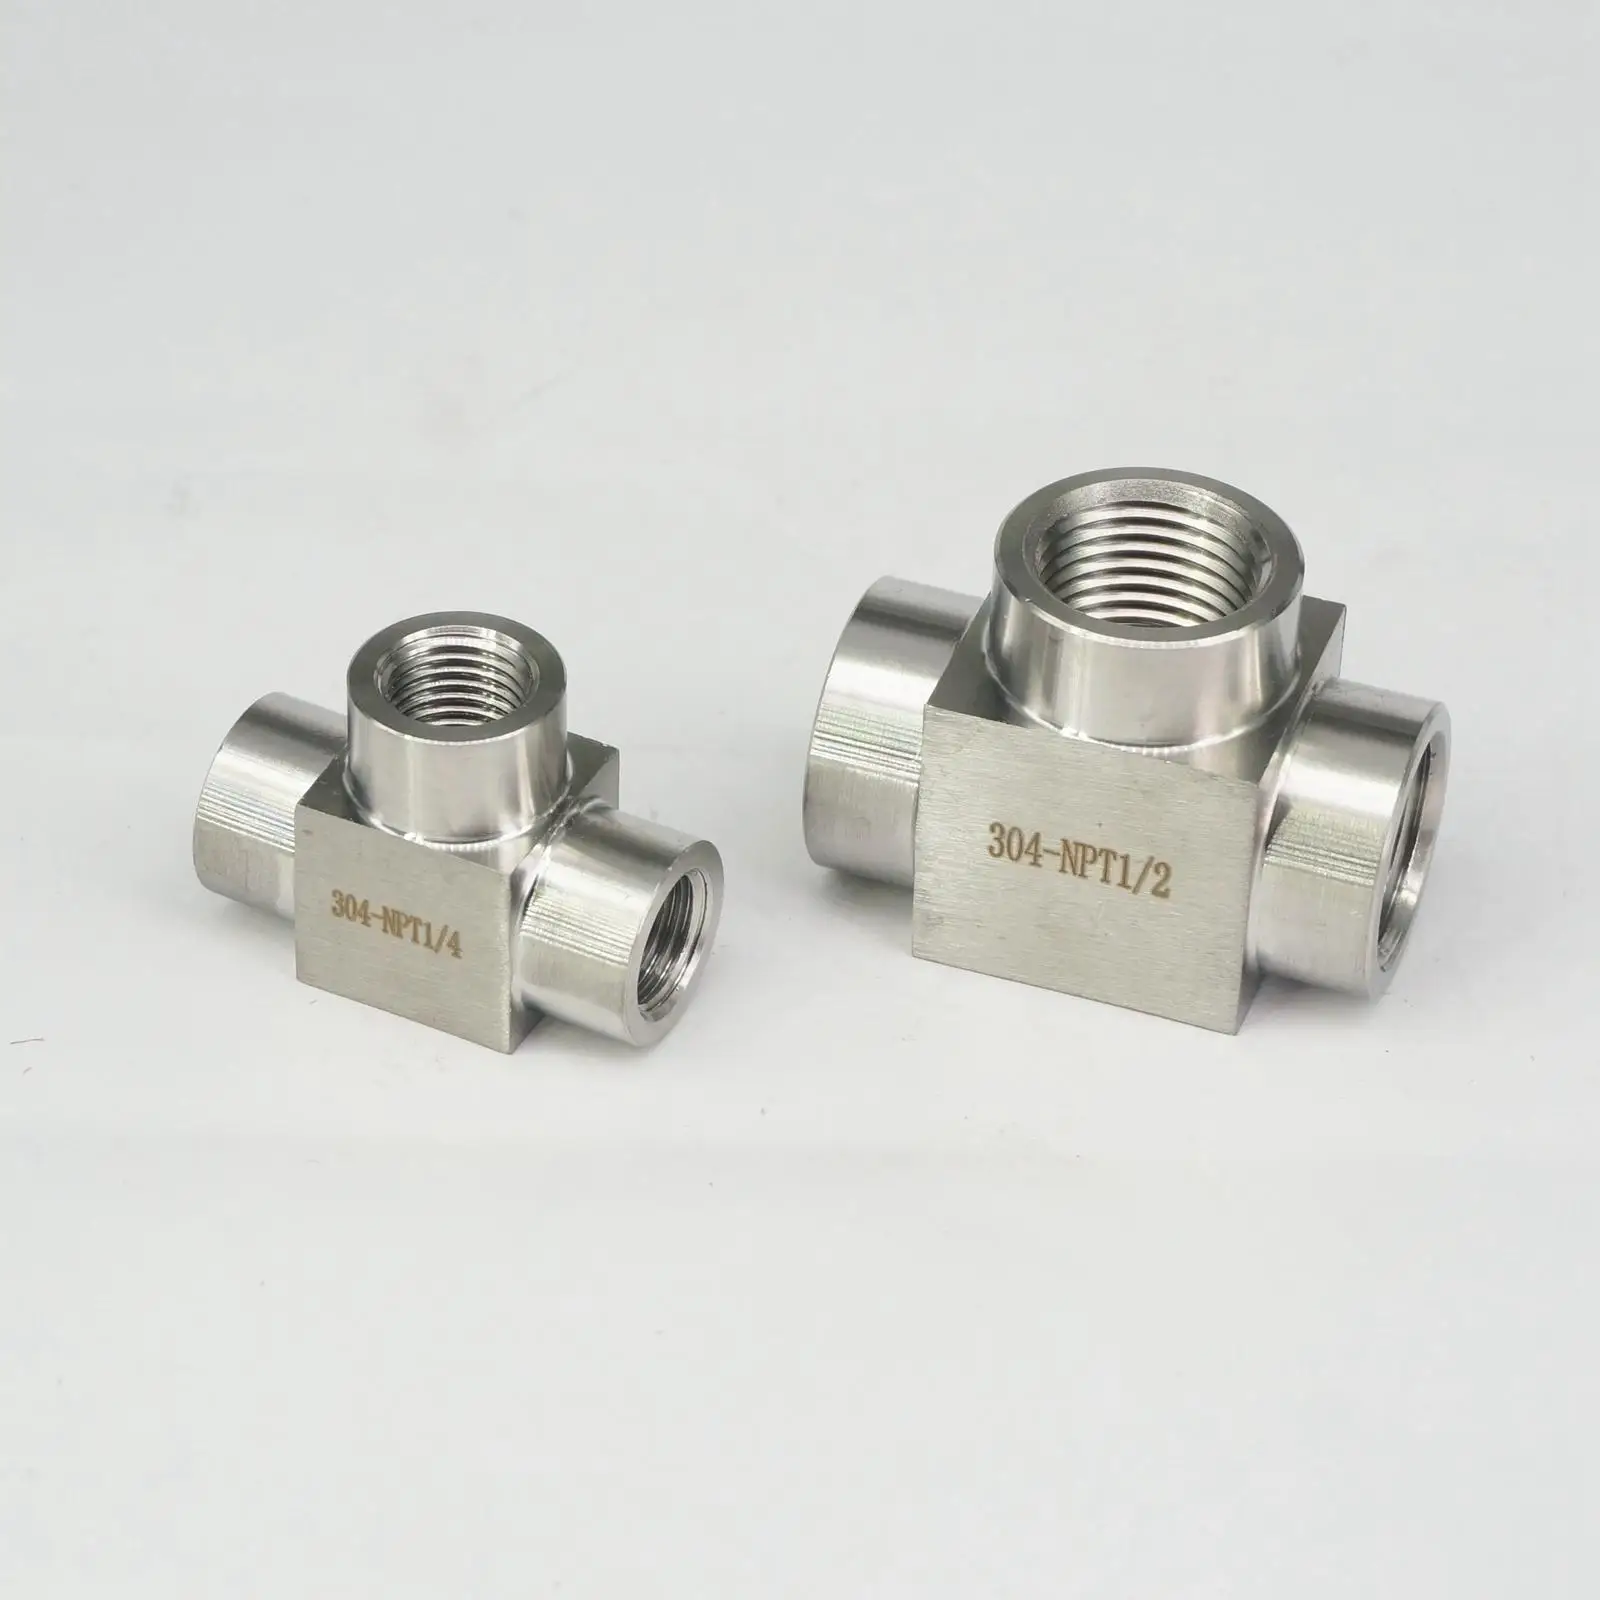 1-1/4" Tee 3 way Female Stainless Steel 304 Threaded Pipe Fitting NPT NEW